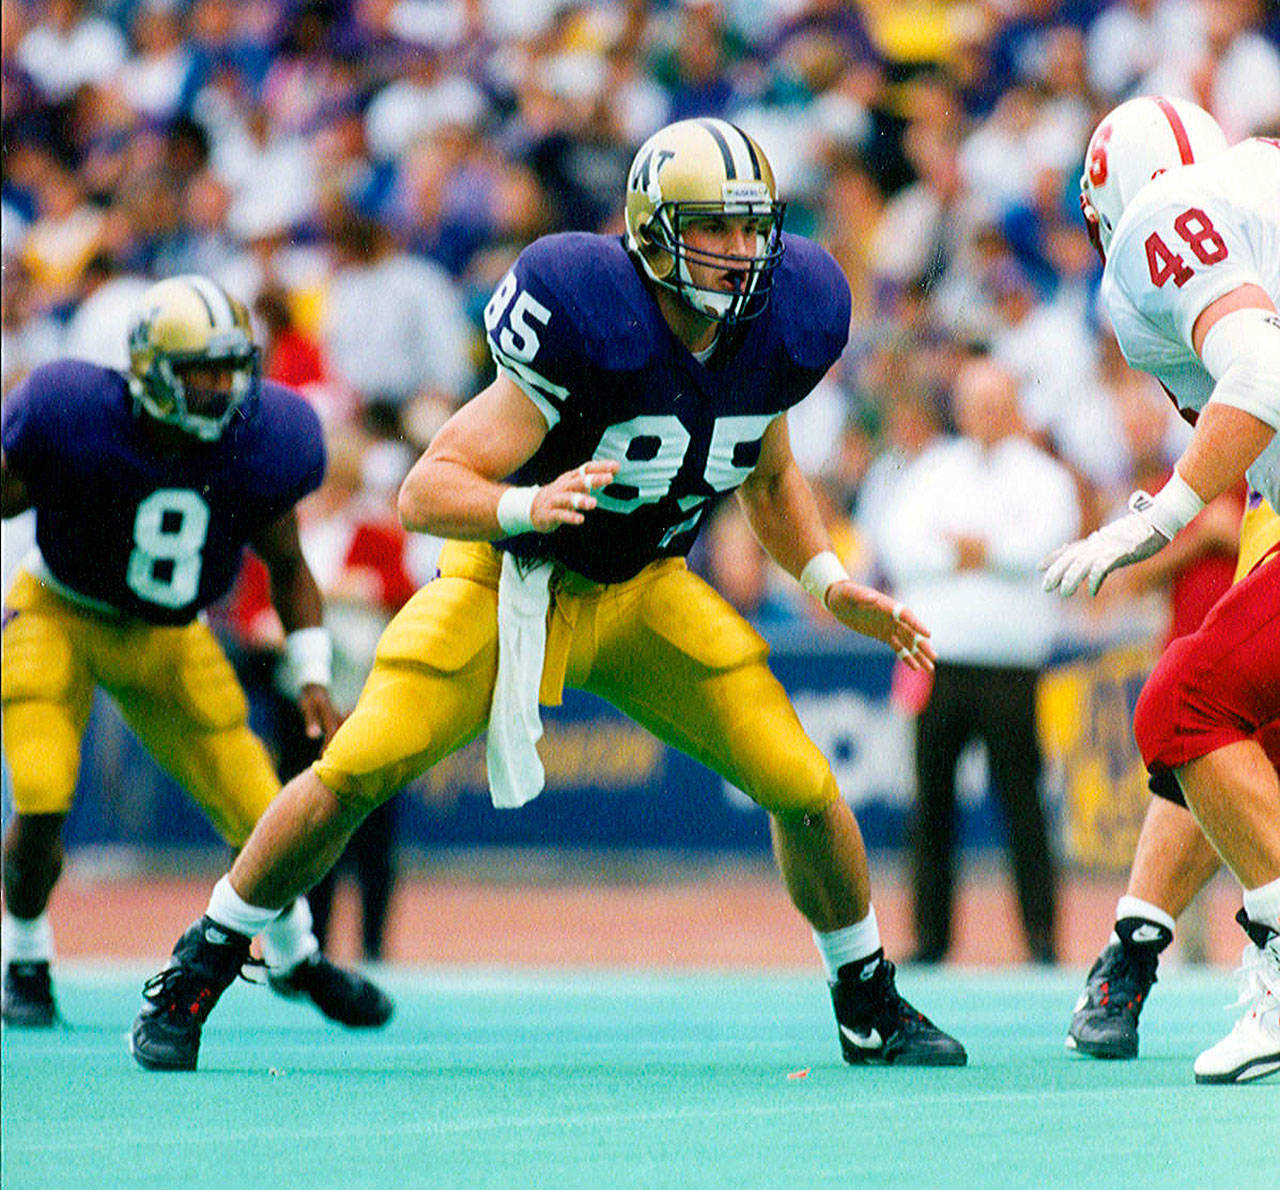 University of Washington tight end Mark Bruener plays against Stanford during his college career. The Aberdeen native and 13-year NFL veteran will be inducted into the Pacific Northwest Hall of Fame on July 25. (Photo Courtesy of University of Washington)